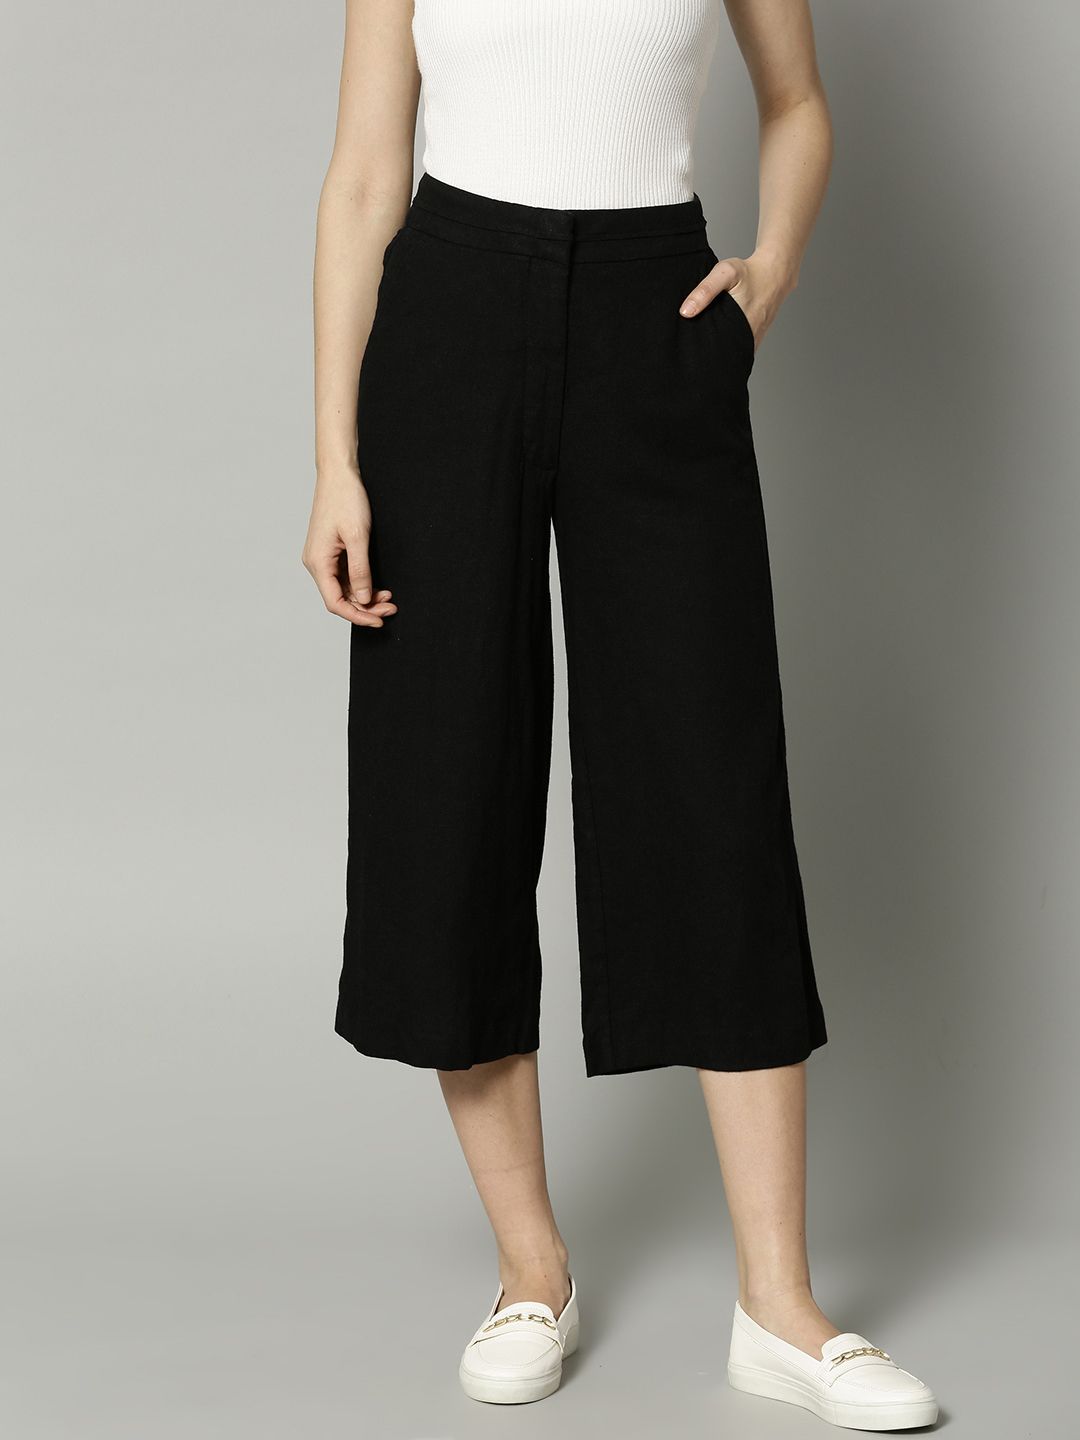 Marks & Spencer Women Black Regular Fit Solid Culottes Price in India